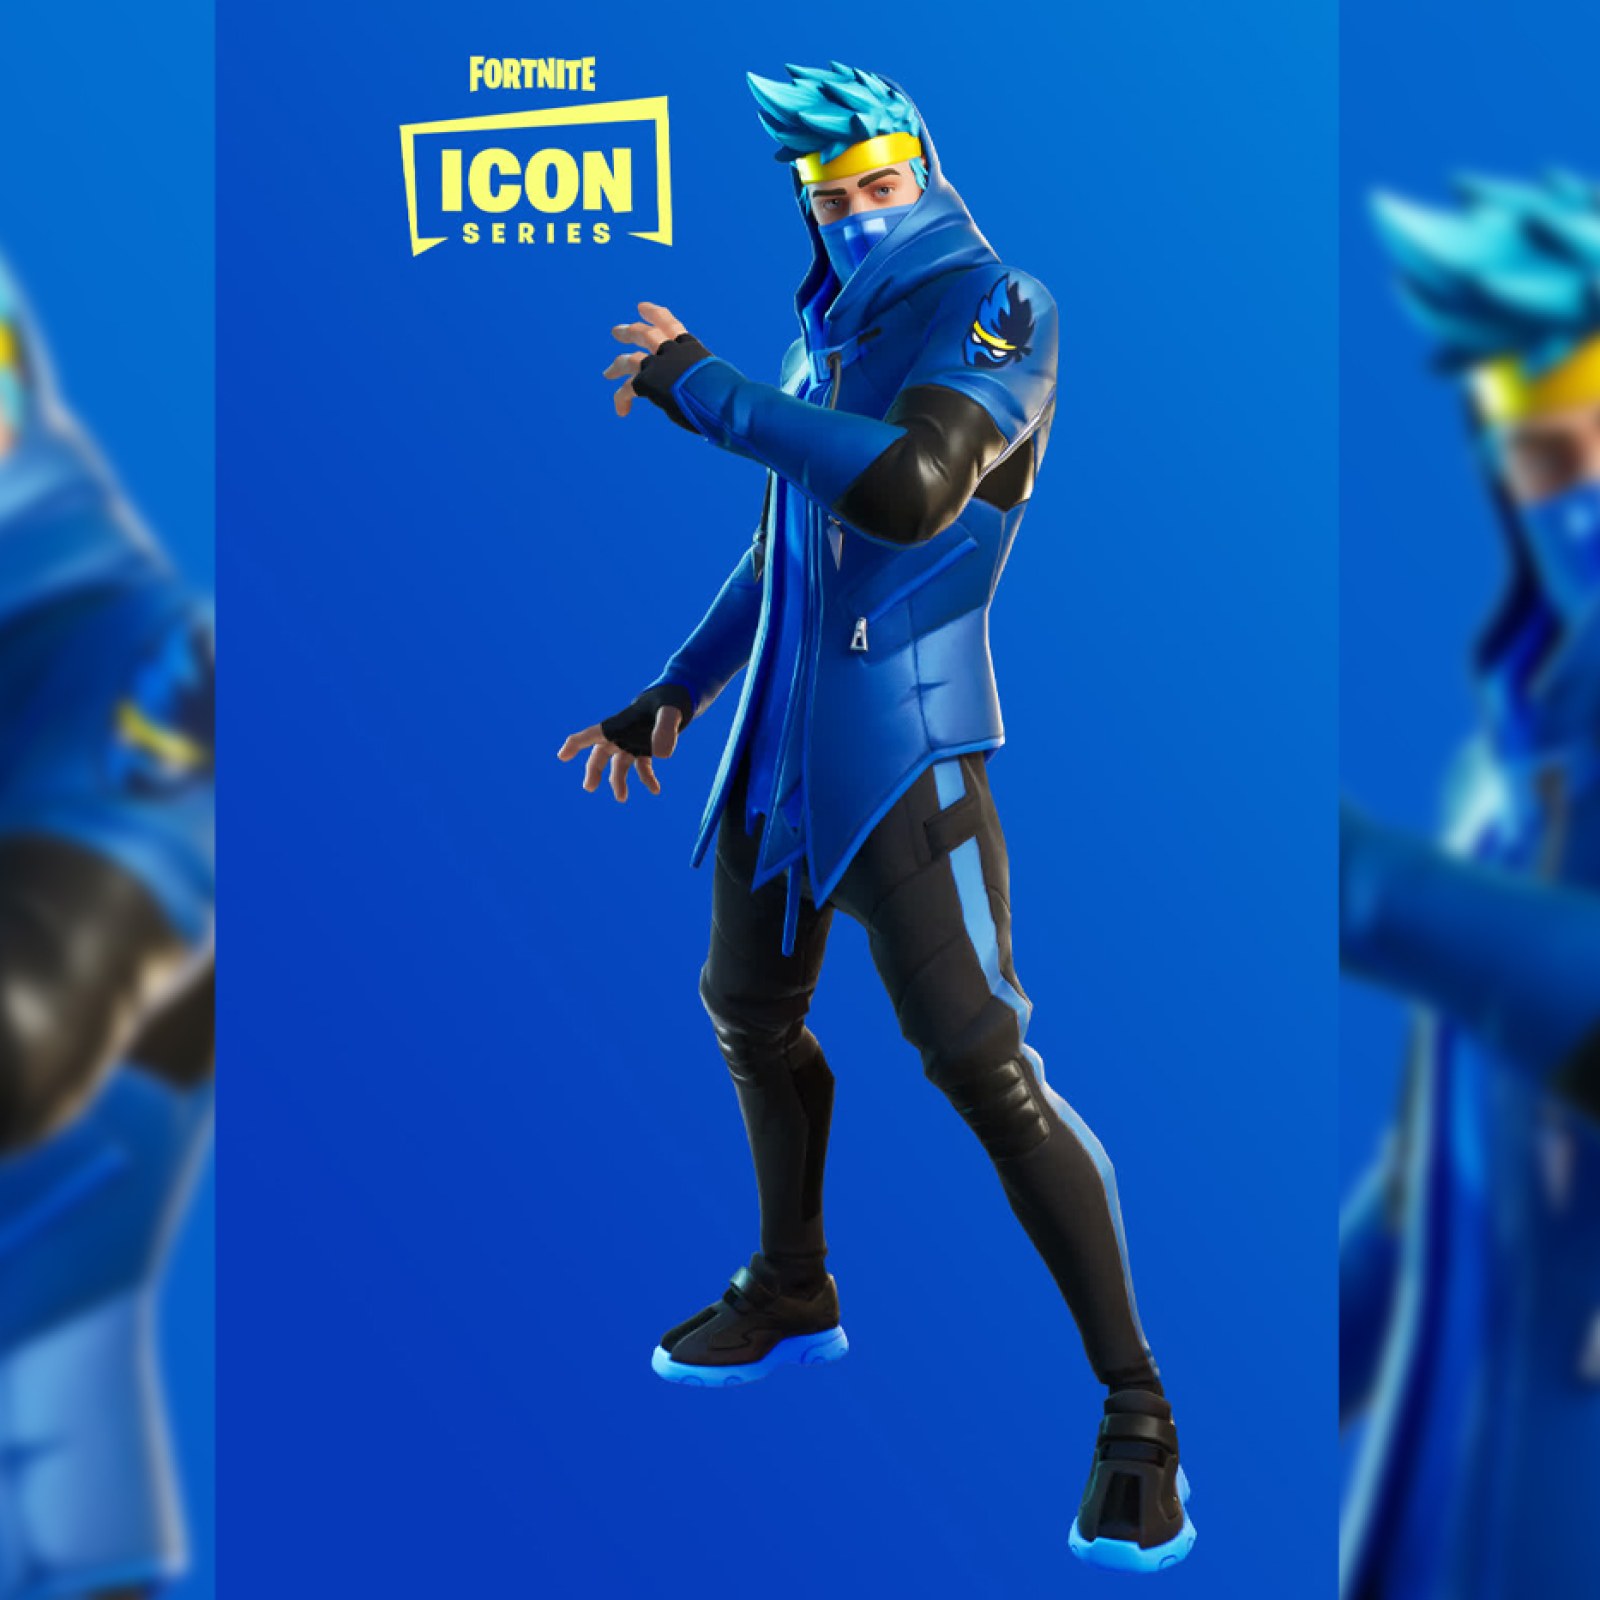 Fortnite Ninja Skin Revealed How To Get The Icon Series Outfit In Item Shop